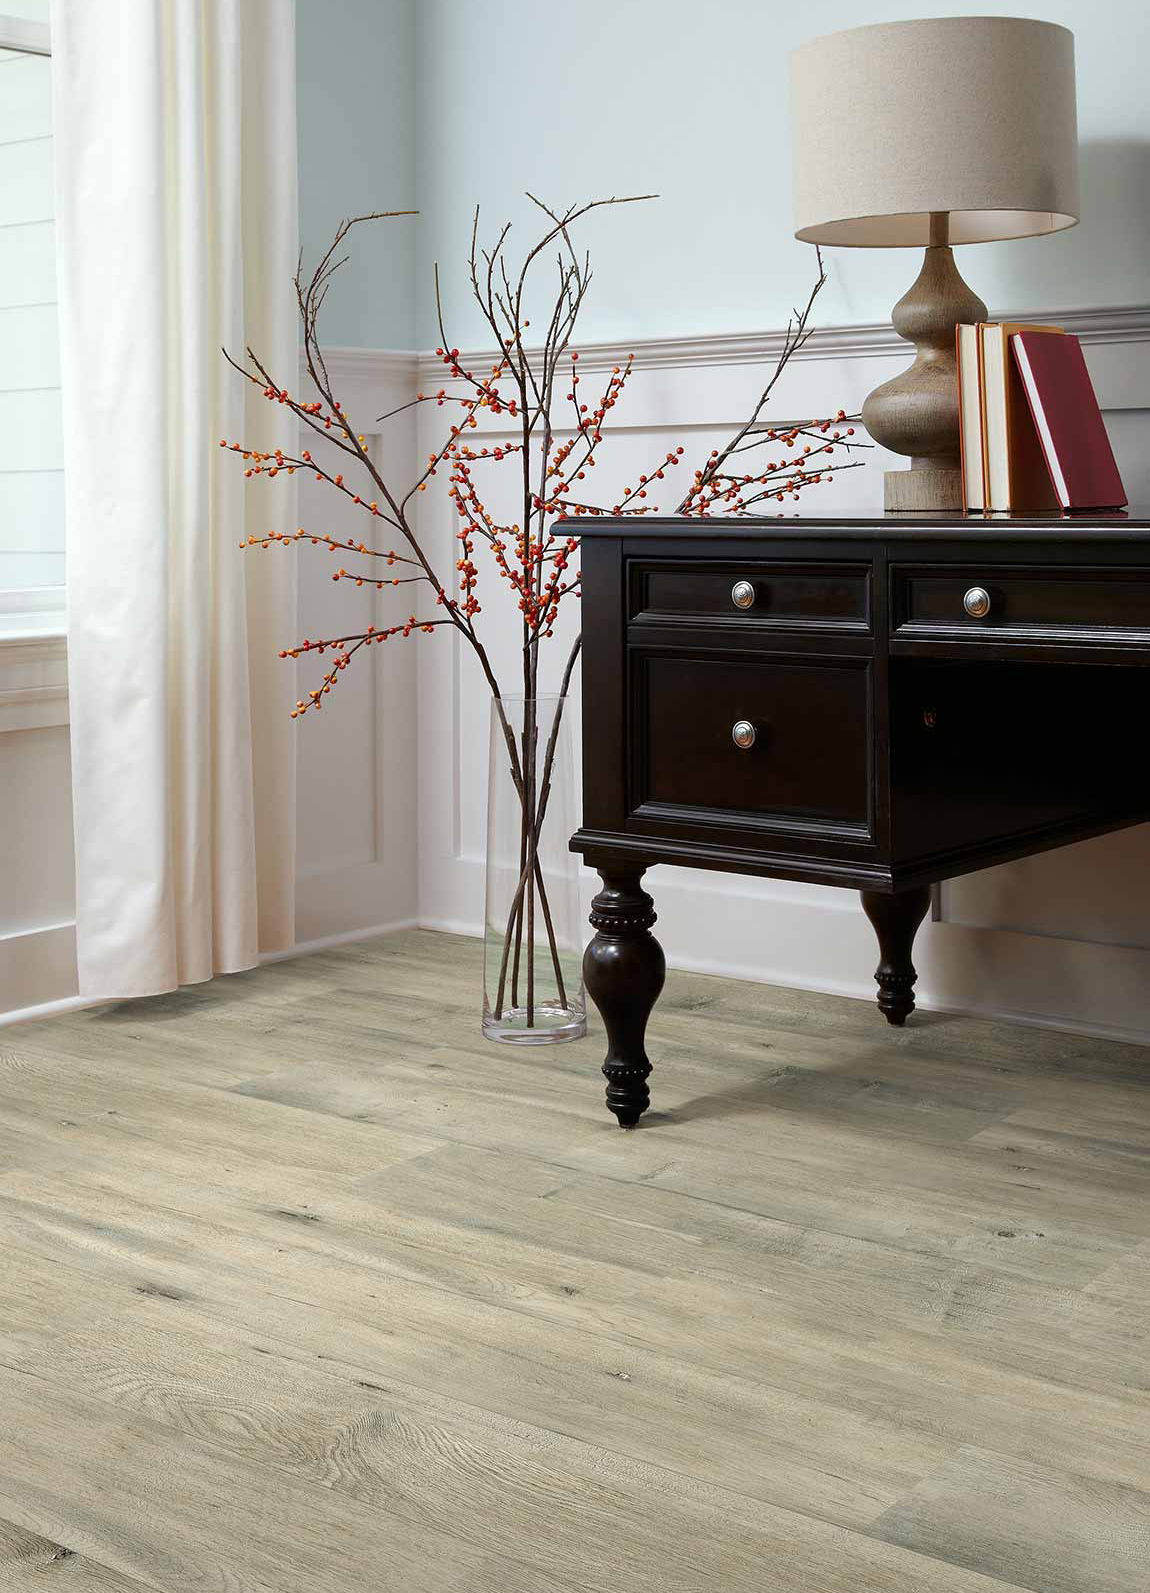 laminate by Shaw in hallway featuring floor decoration and end table with lamp and books.